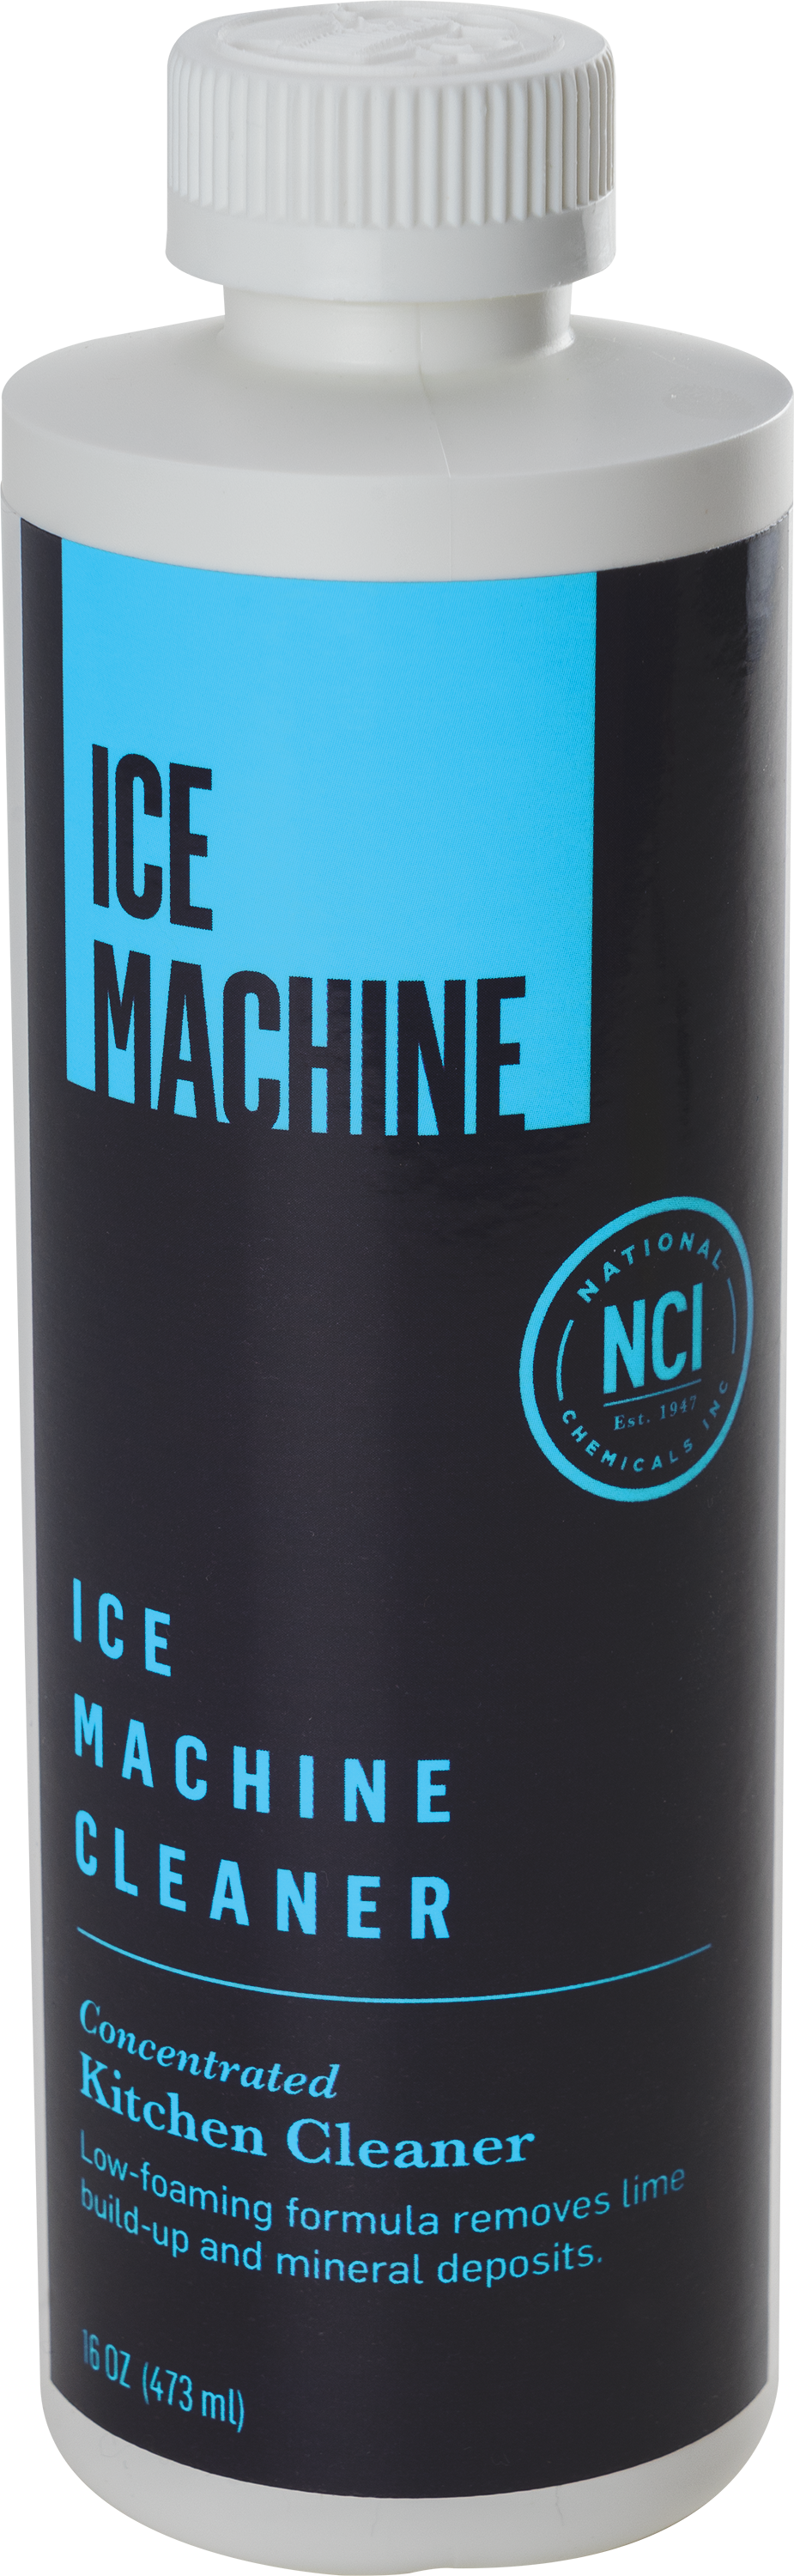 41081 Ice Machine Cleaner - National Chemicals